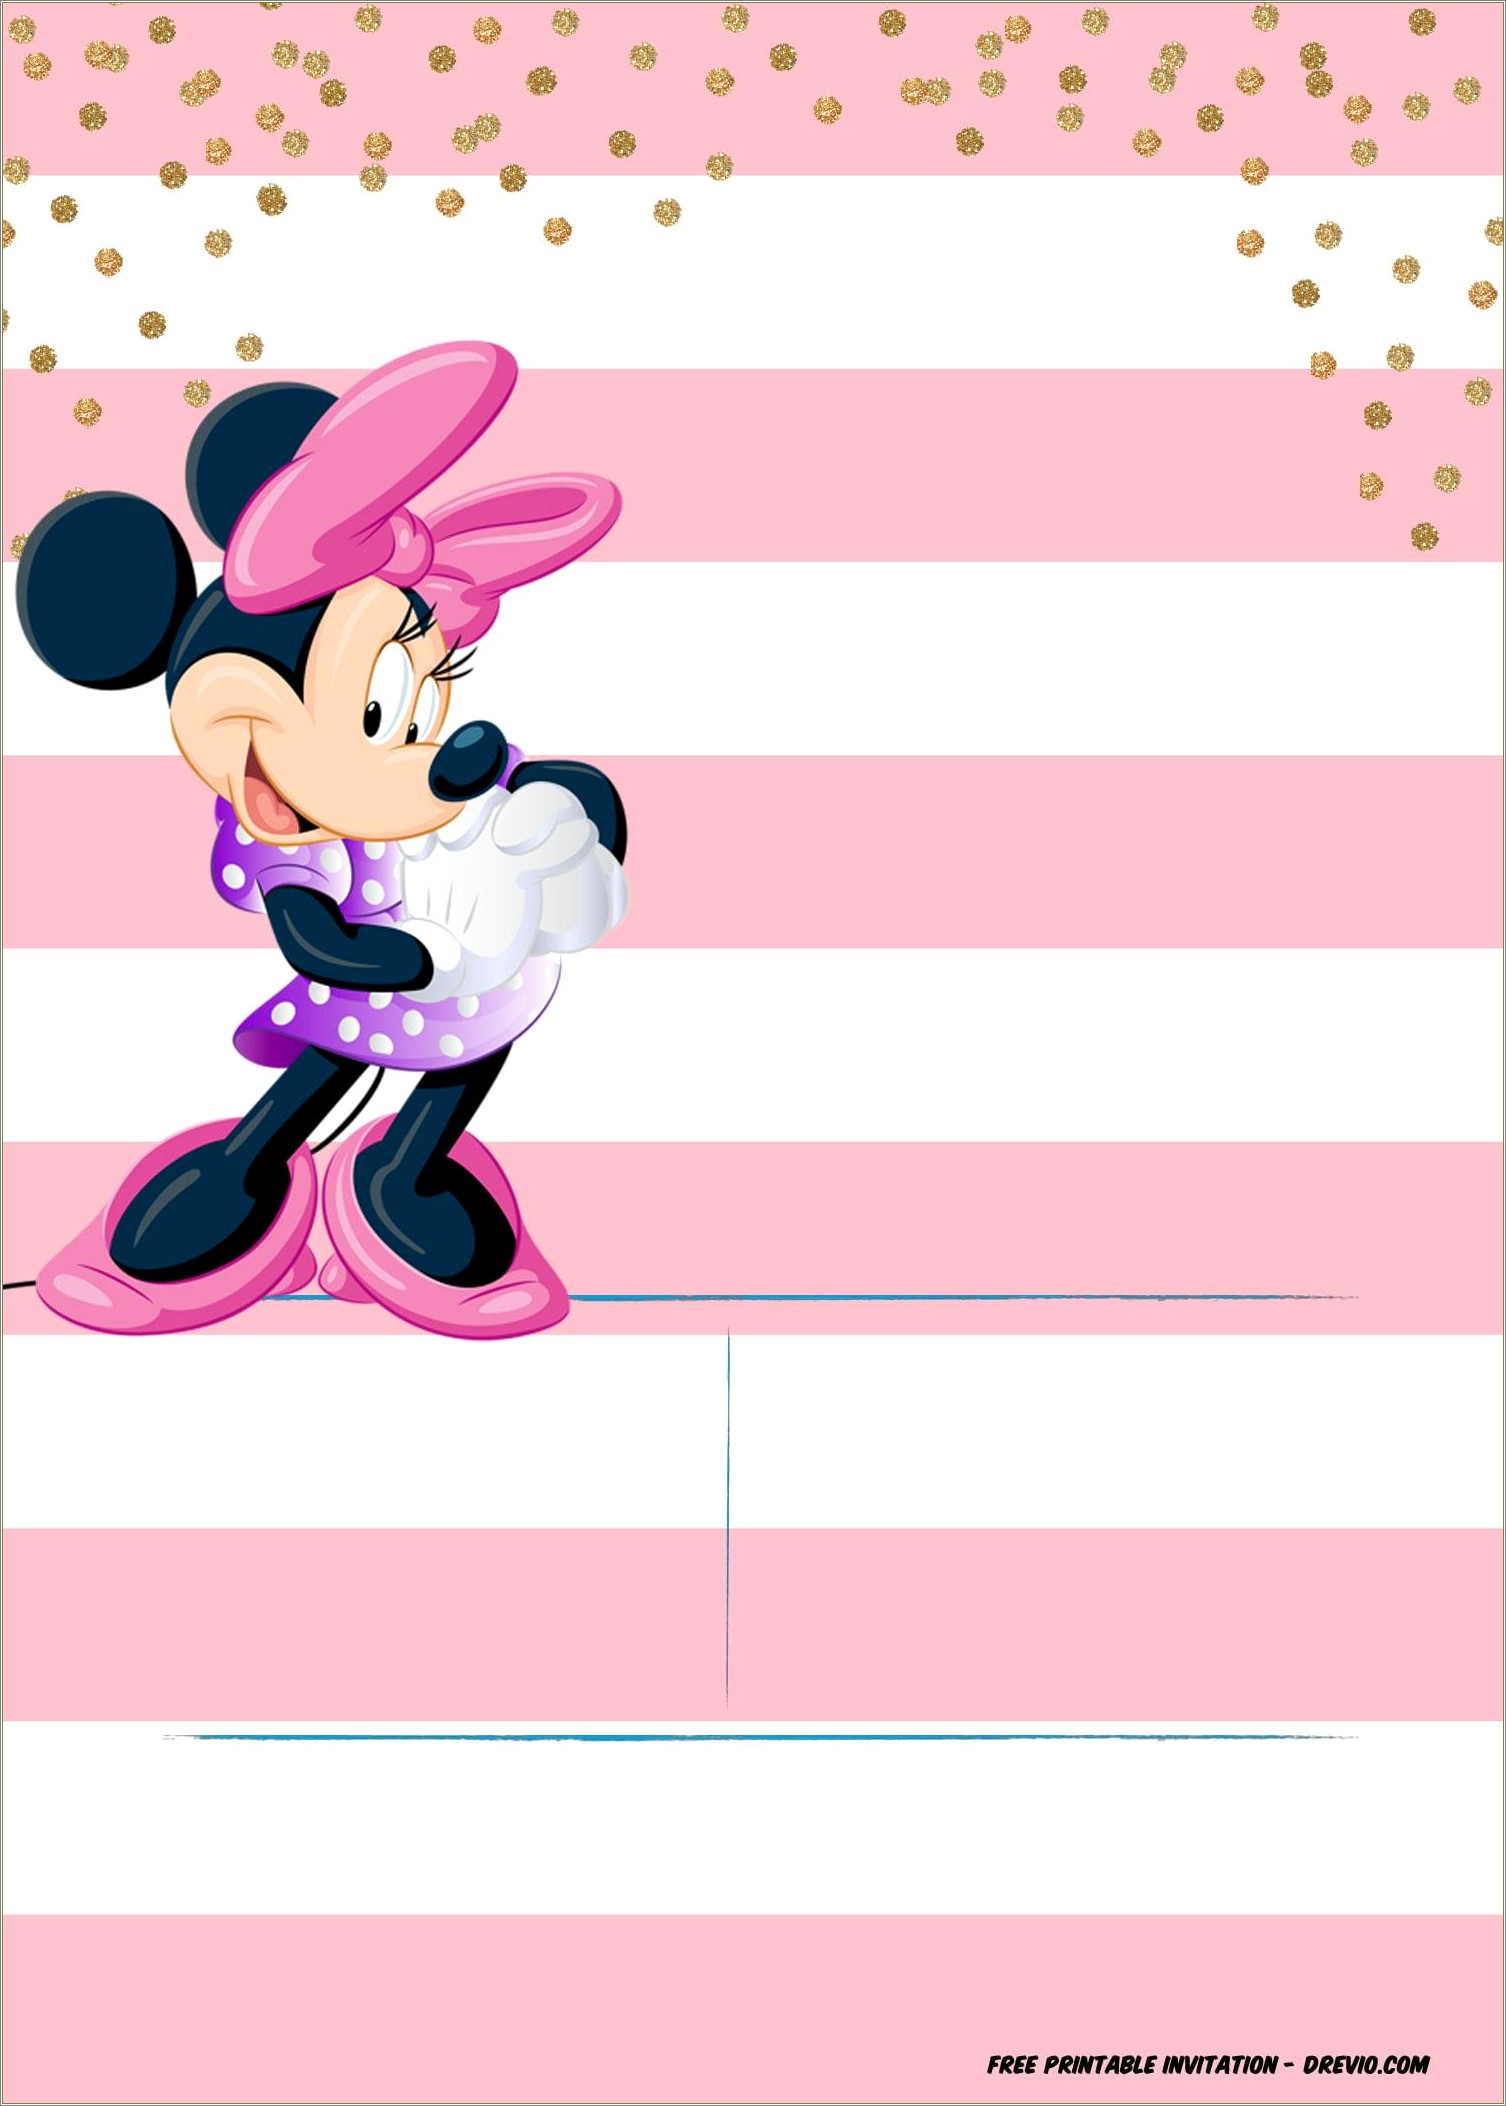 Minnie Mouse Birthday Invitation Template Free Download